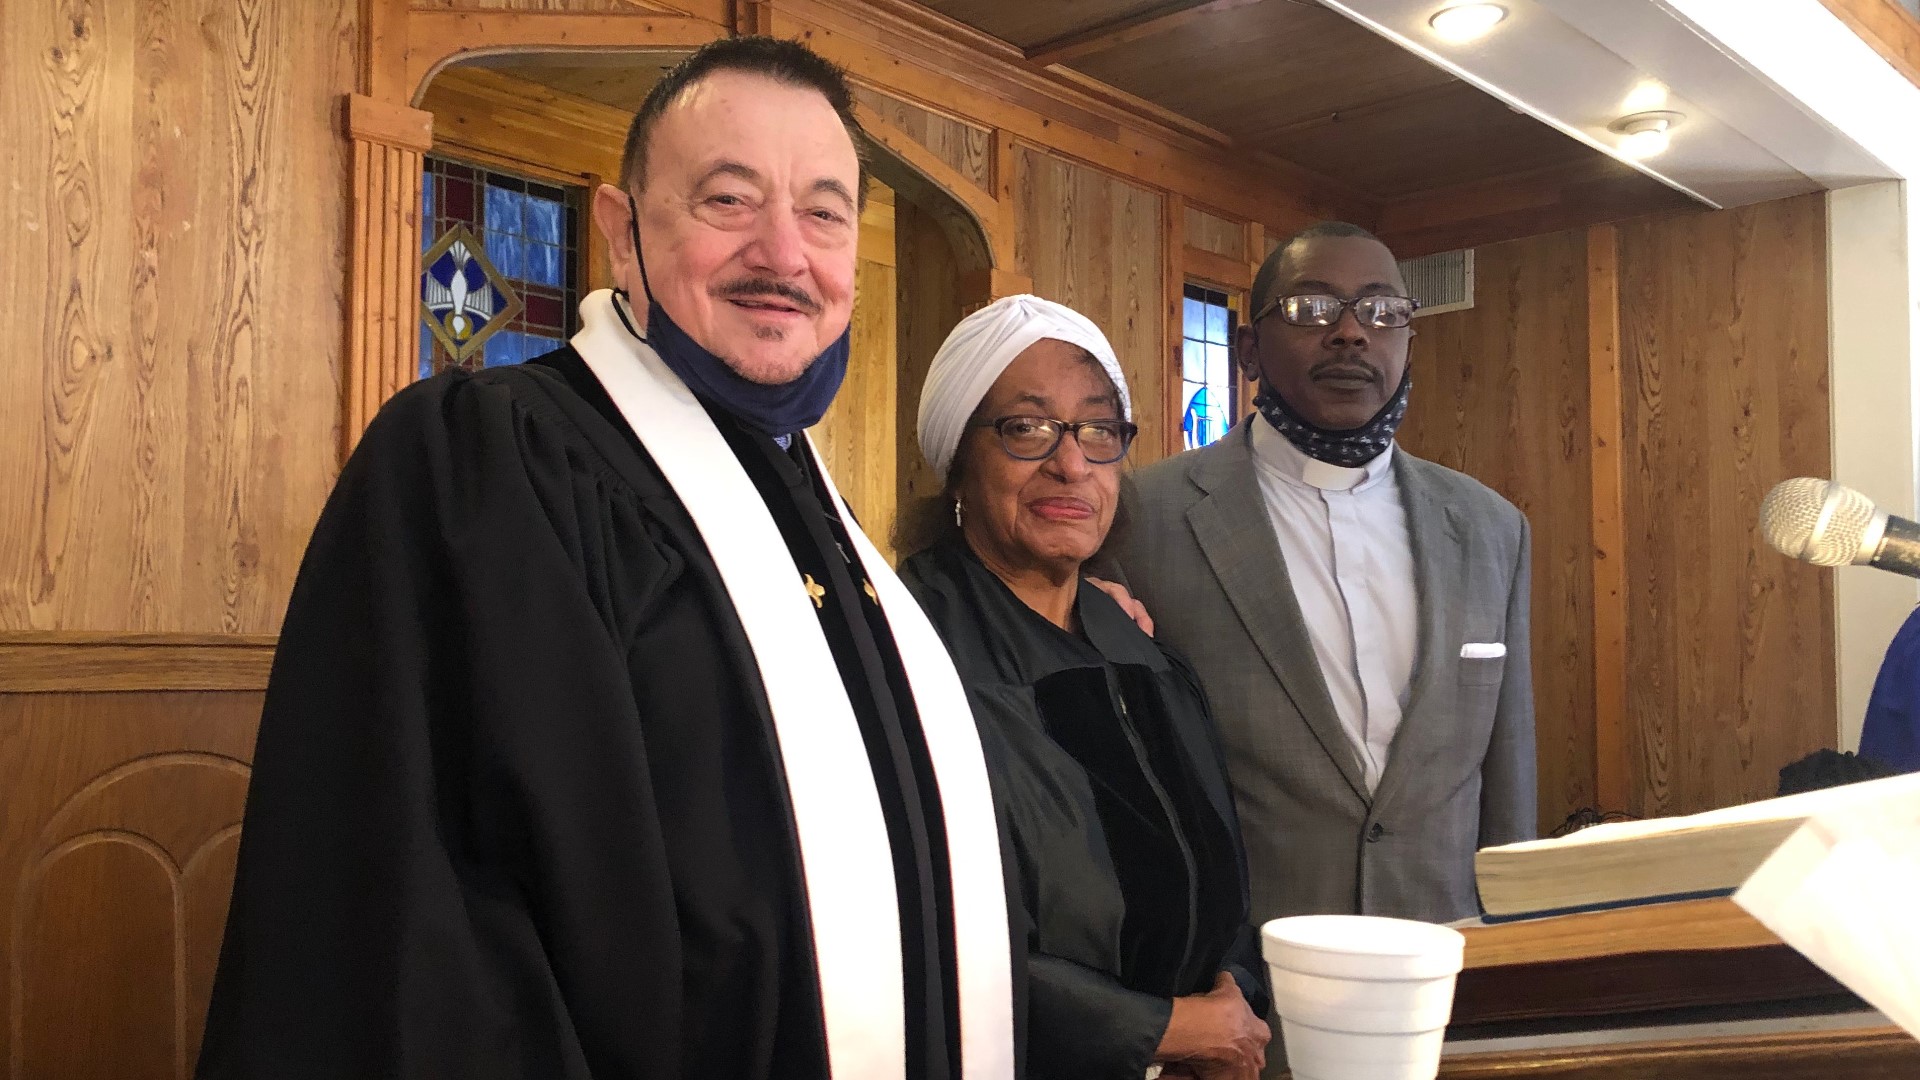 Two churches -- one predominantly Black church and the other predominantly white -- came together in the midst of racial tensions in the country.